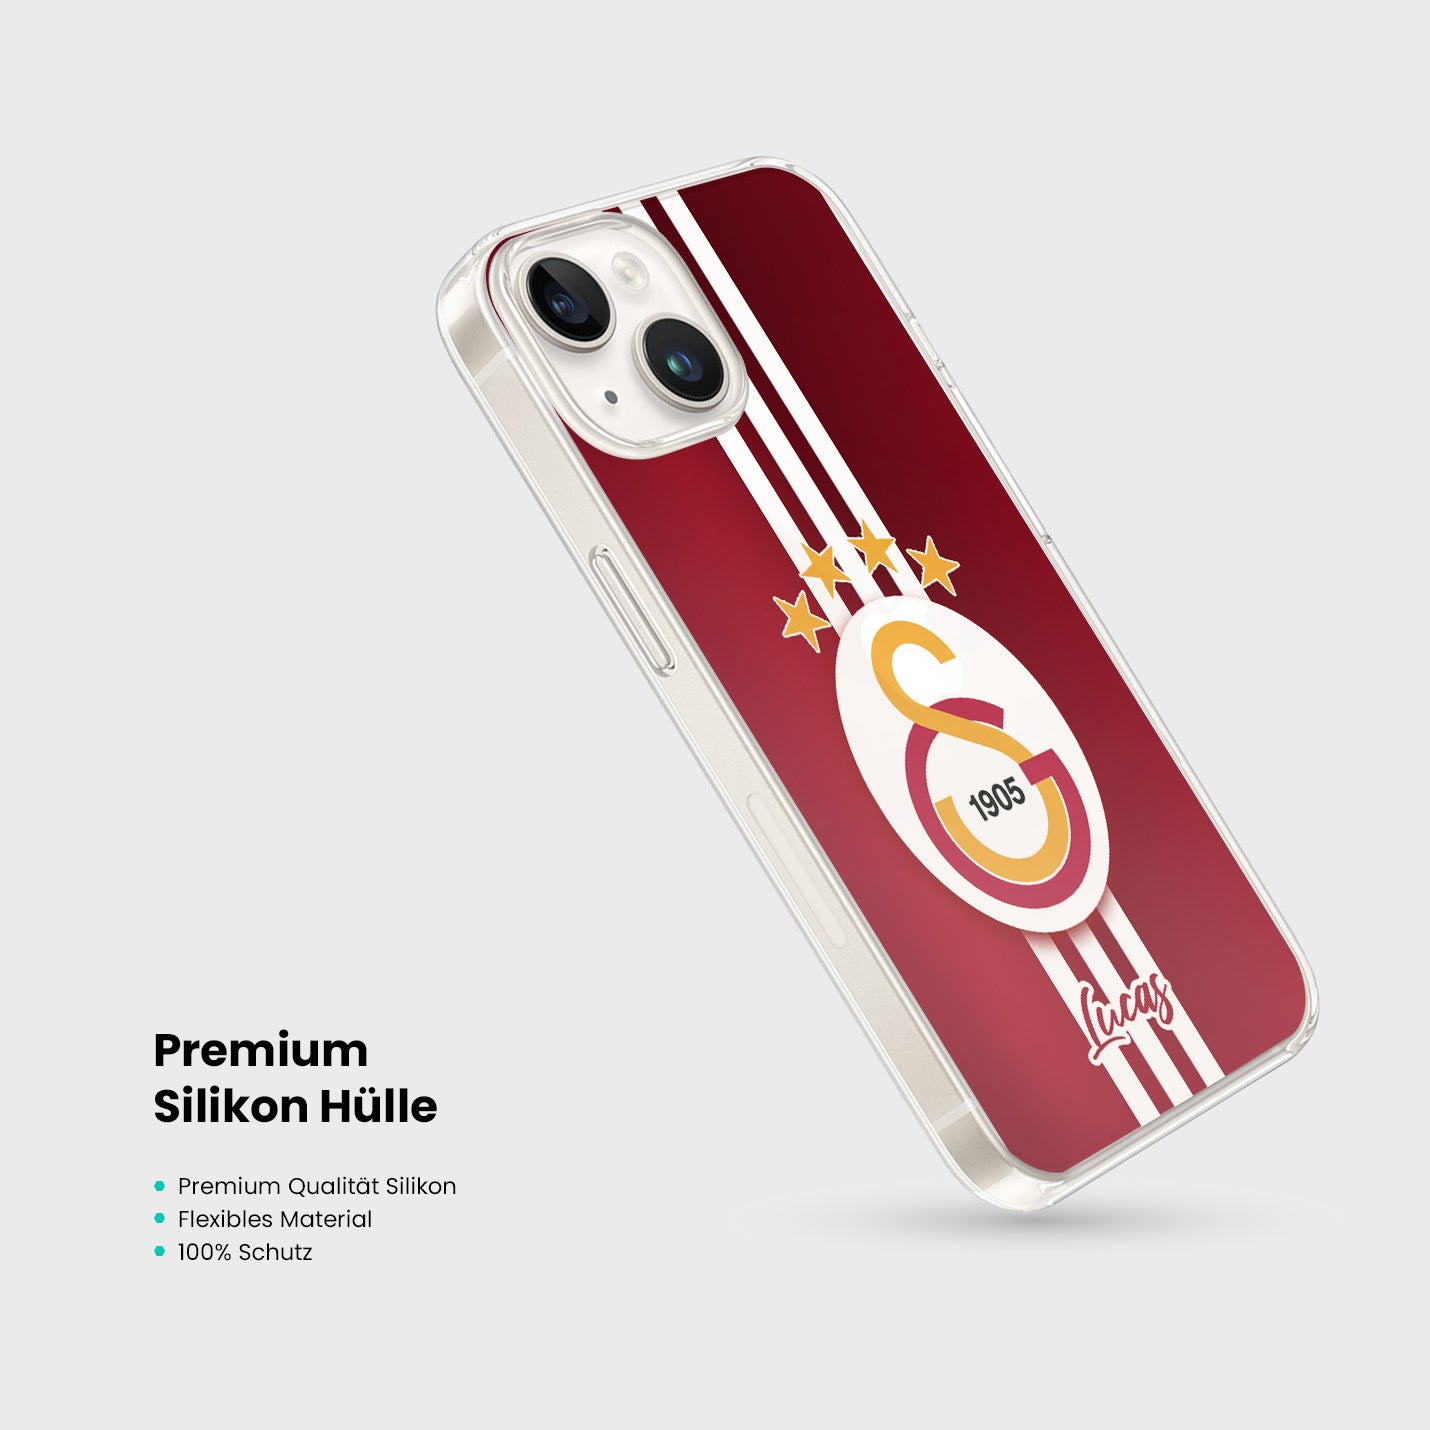 Galatasaray Hülle & Cover - 1instaphone